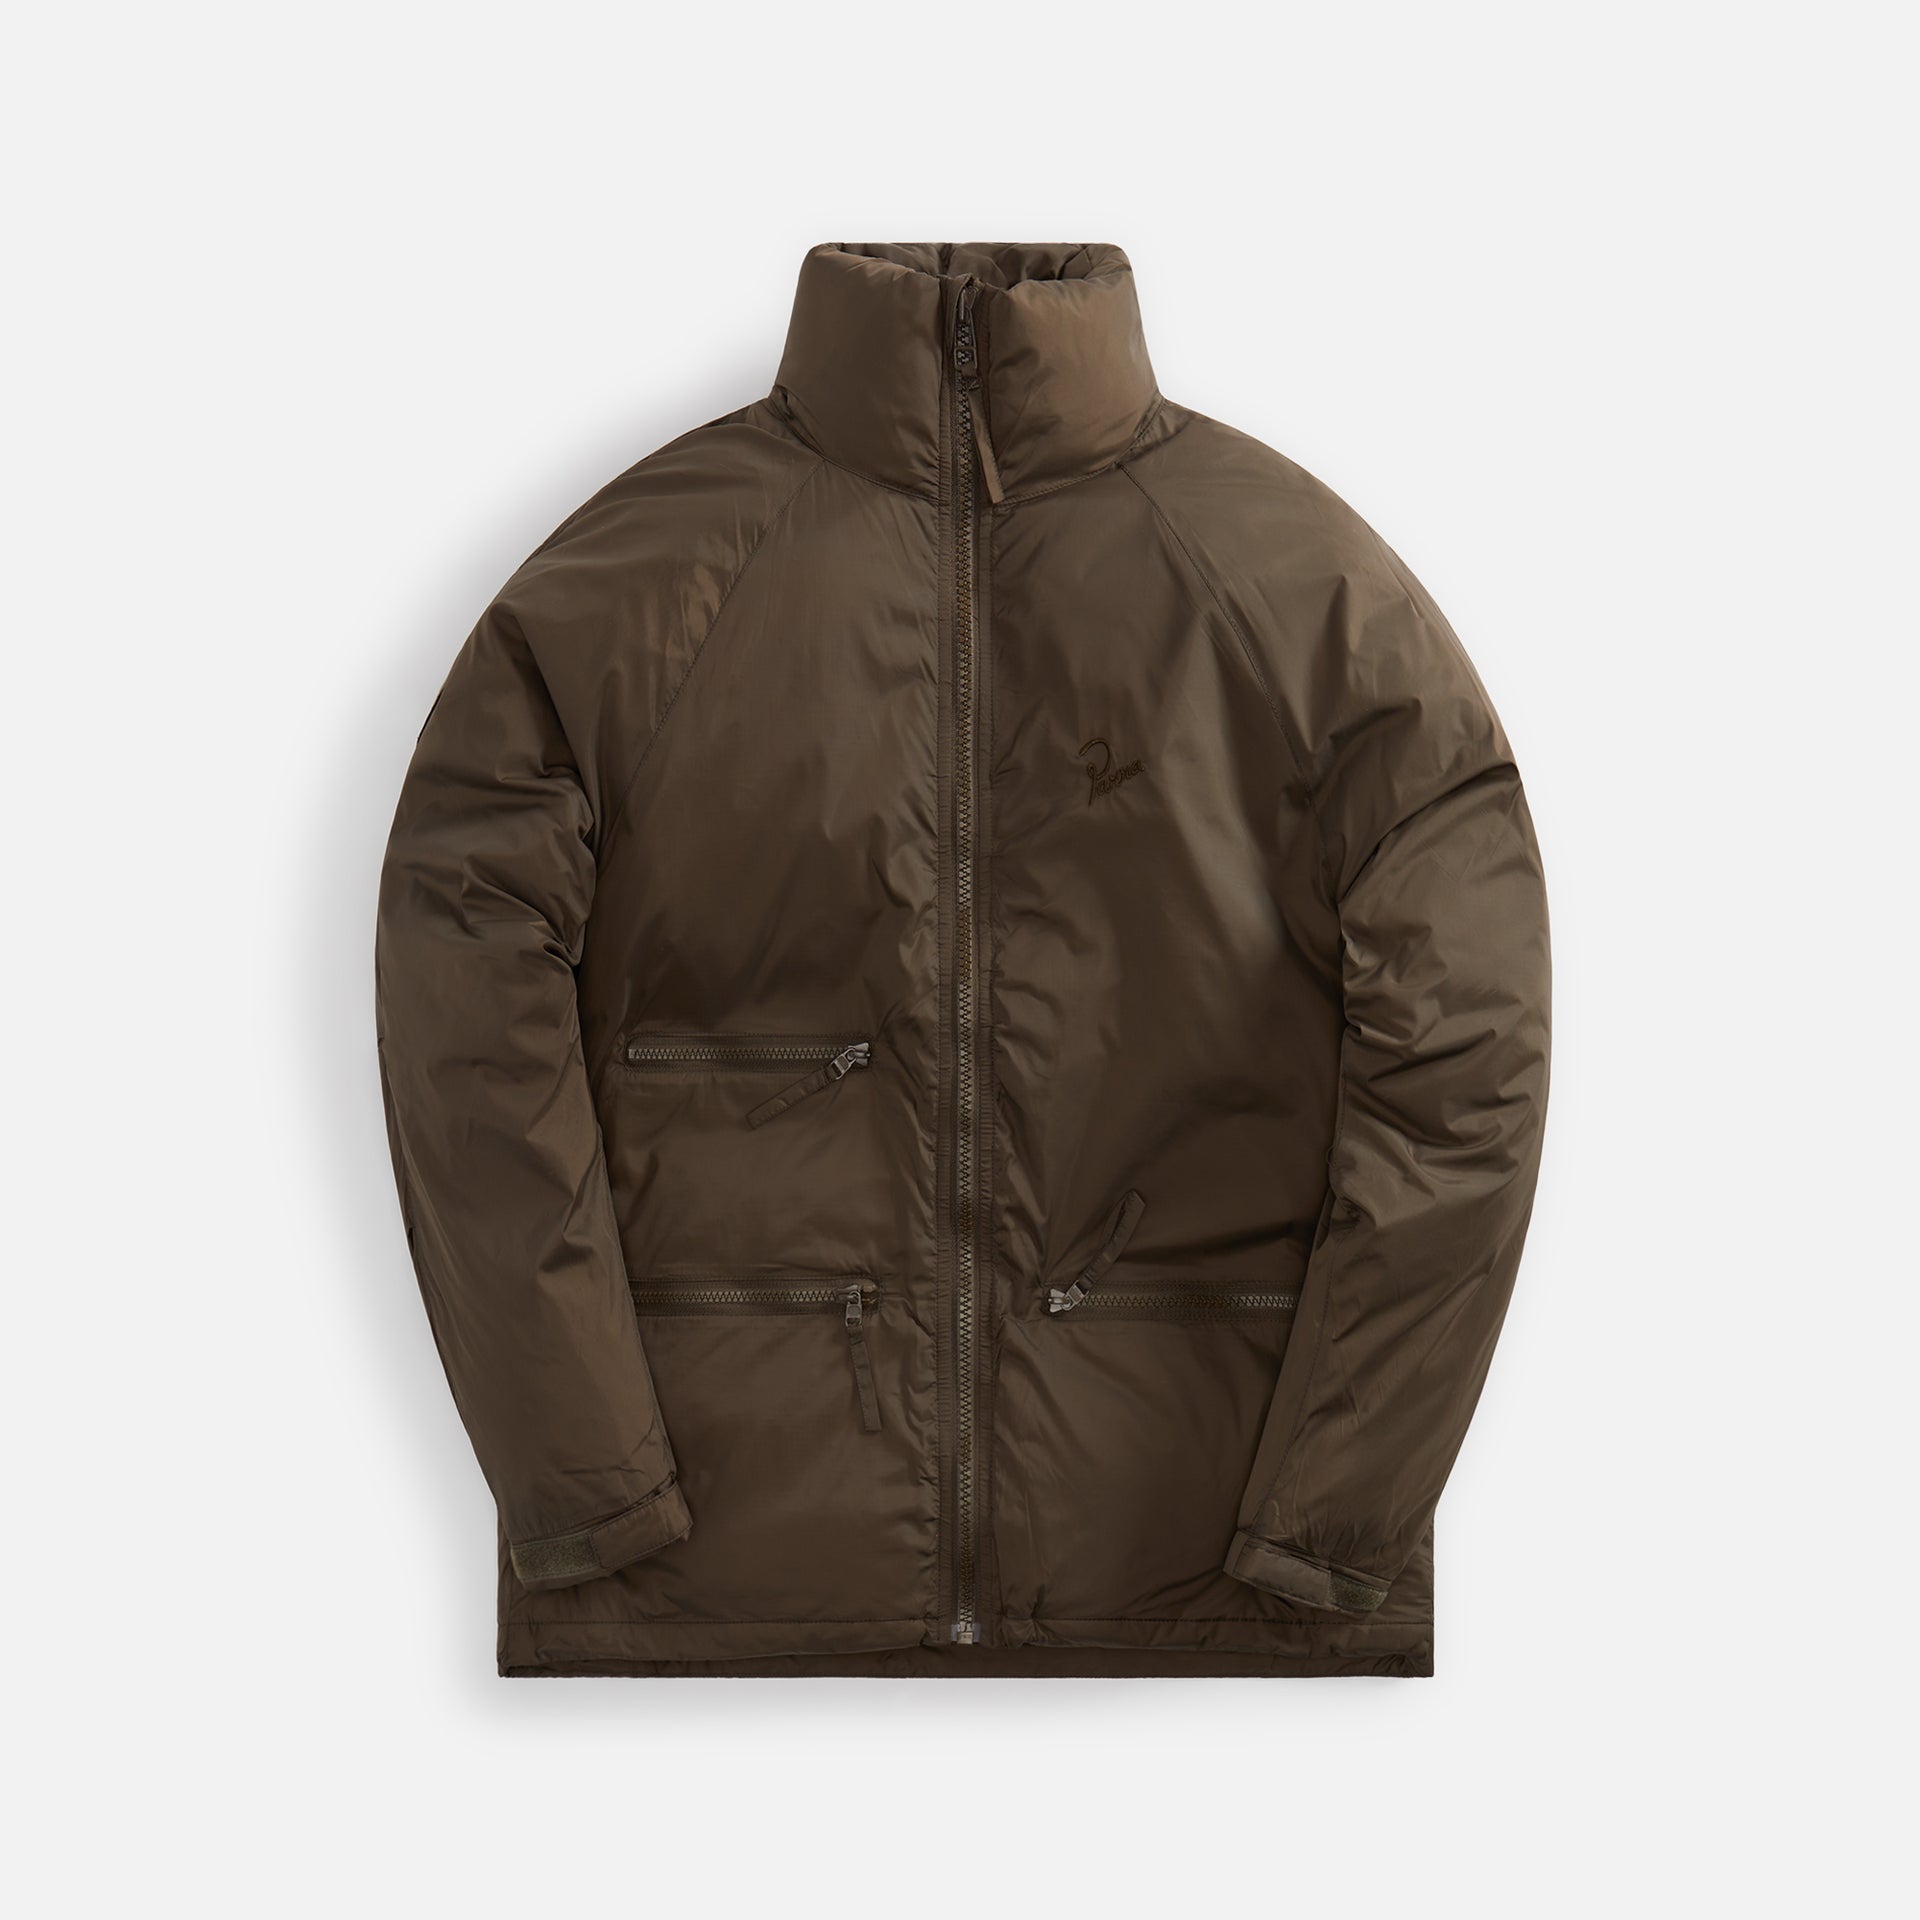 by Parra Canyons All Over Jacket Nike - Coffee Brown